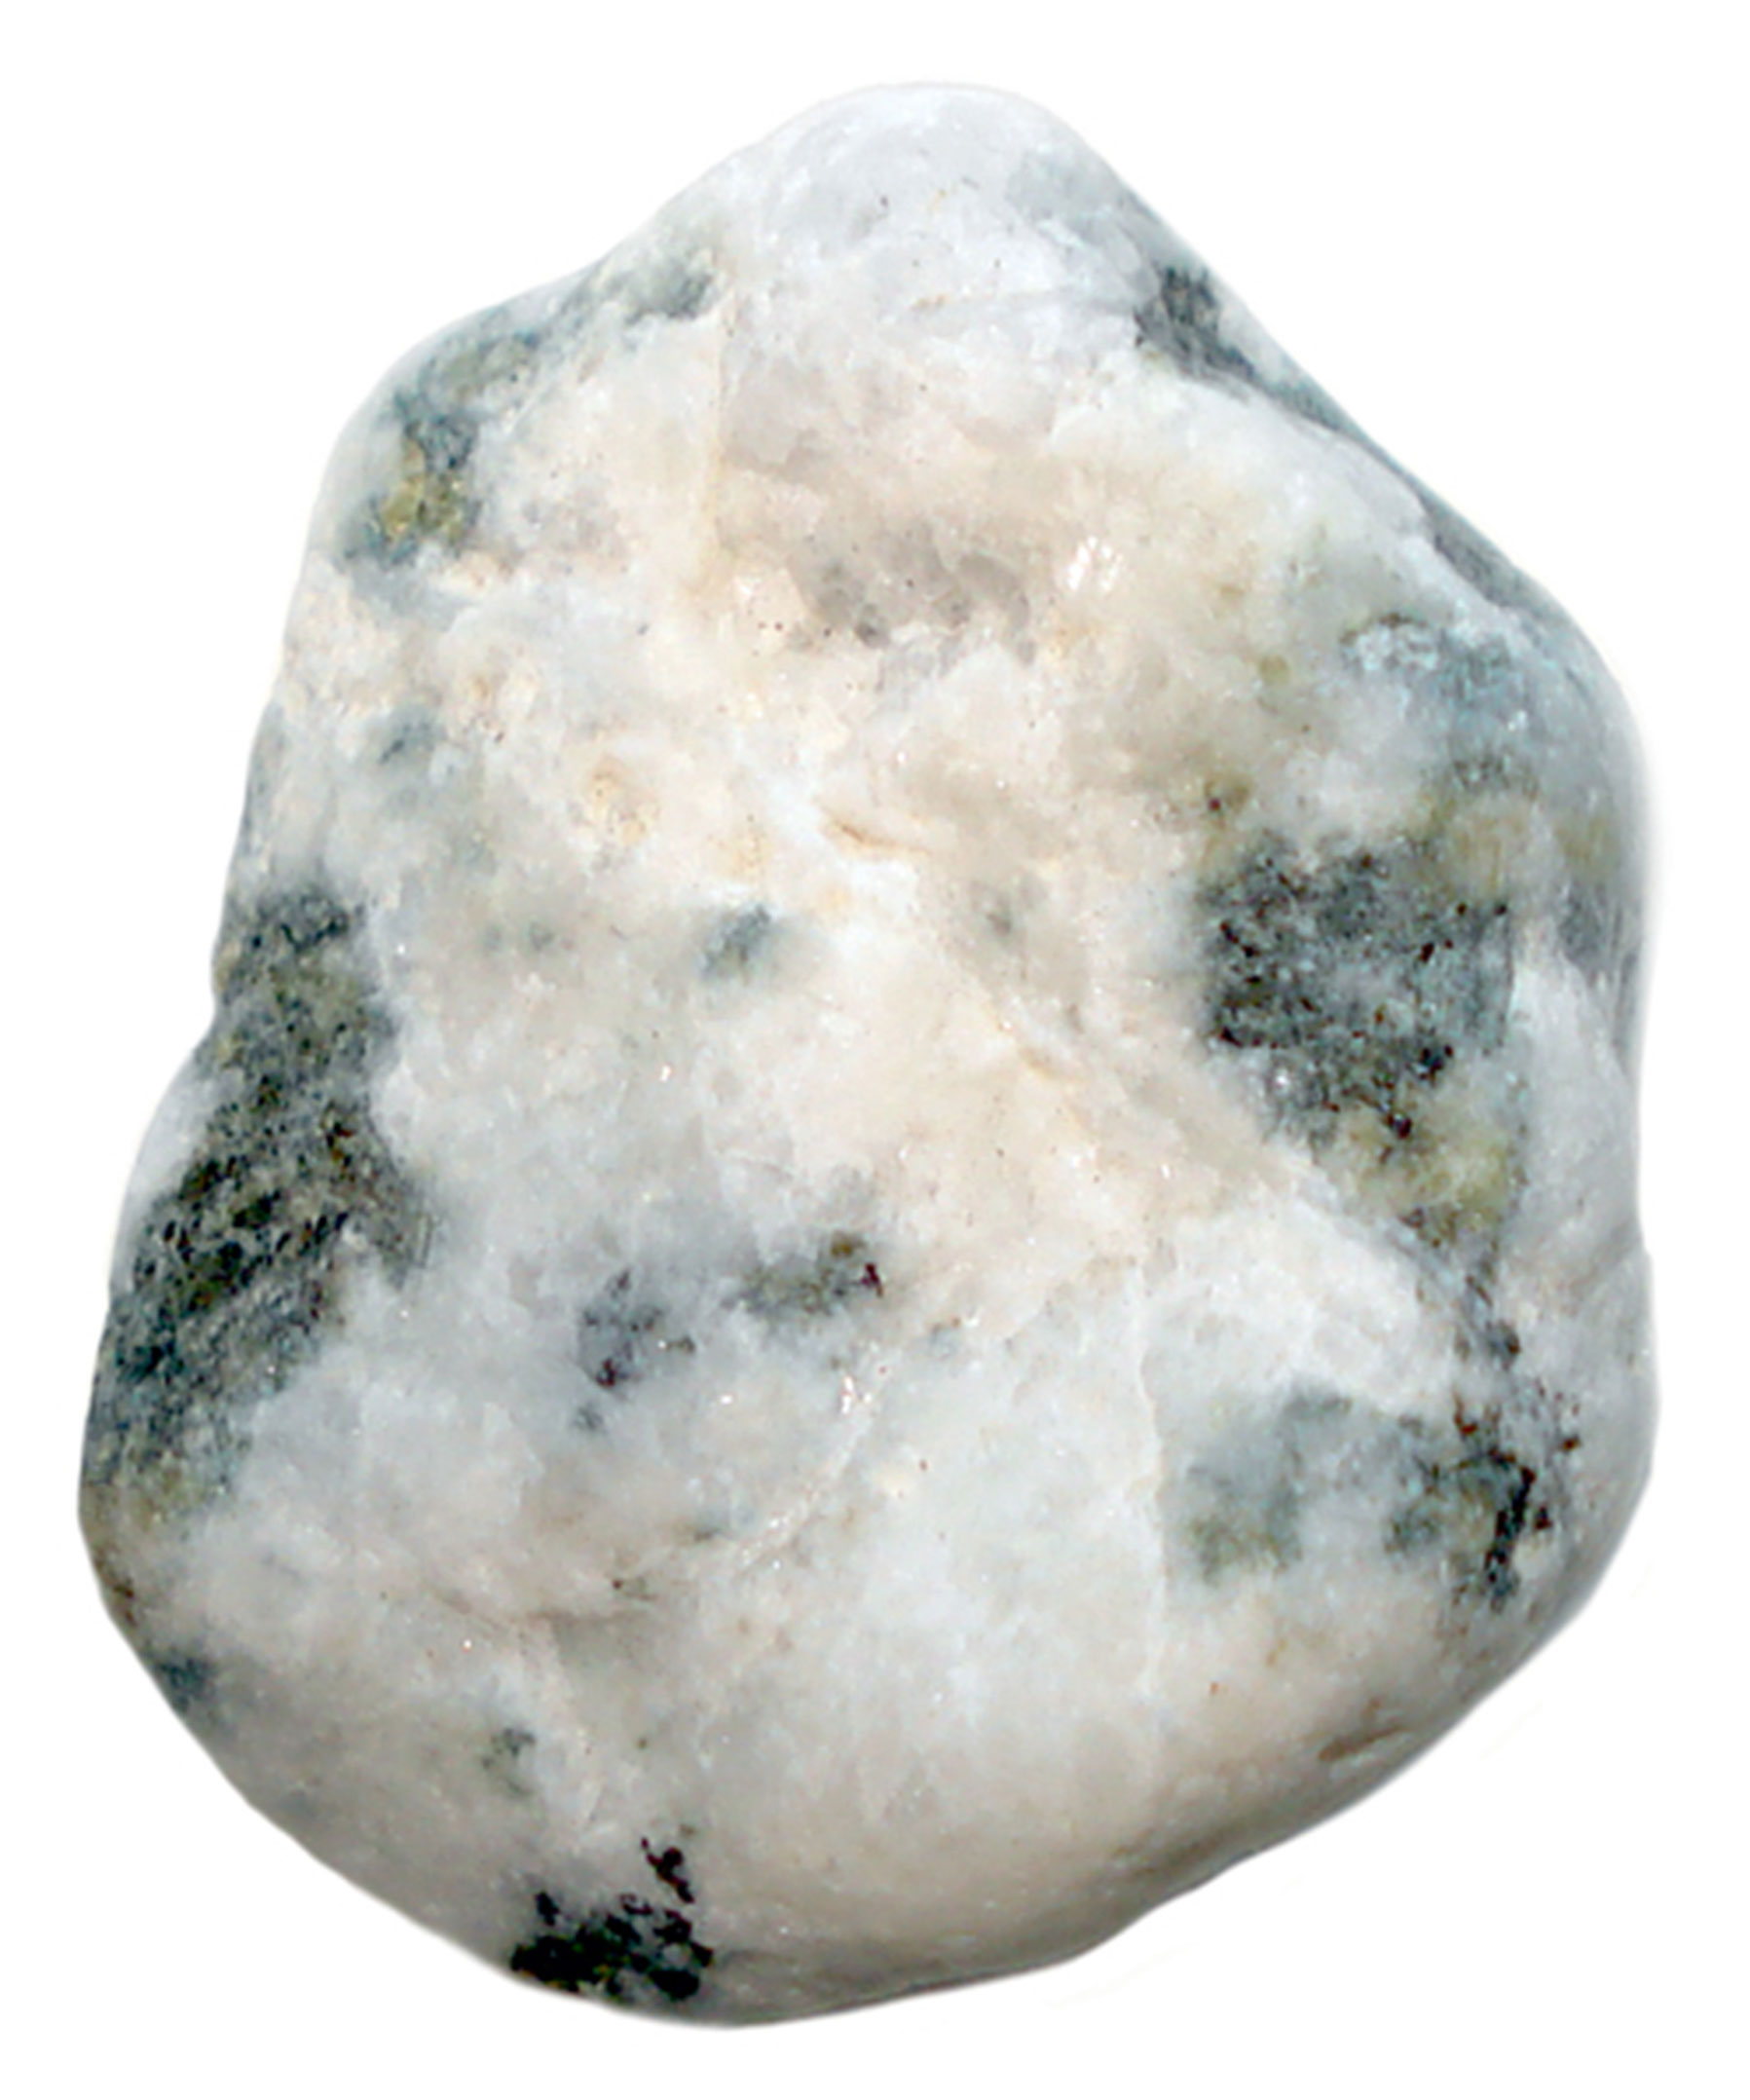 A photograph of a rock which resembles gorgonzola. 